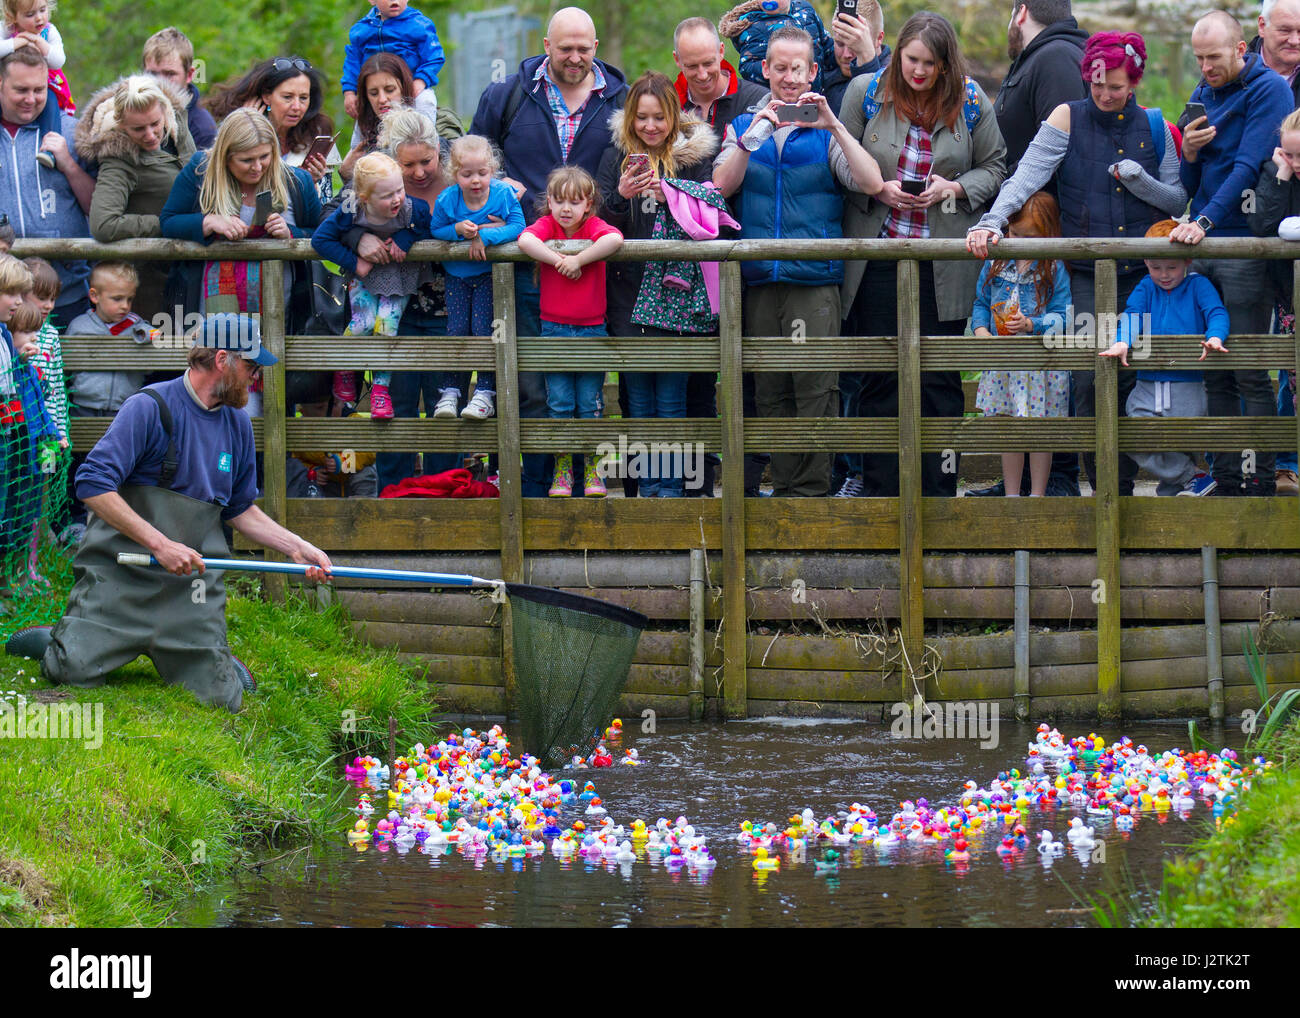 Tarlescough, Nr Southport, UK. 1st May, 2017.  Bank Holiday plastic duck race. WWT Martin Mere Wetland Centre made a splash this bank holiday weekend with the fourth annual plastic duck race on MayDay. Children, and Mums & Dads, came in droves to paint a plastic duck to enter into the popular duck race over the bank holiday.  There were 200 ducks taking part in the race, a variety of colours and designs with the crowds going quackers as the sluice gate was opened to start the race. Credit: MediaWorldImages/Alamy Live News Stock Photo